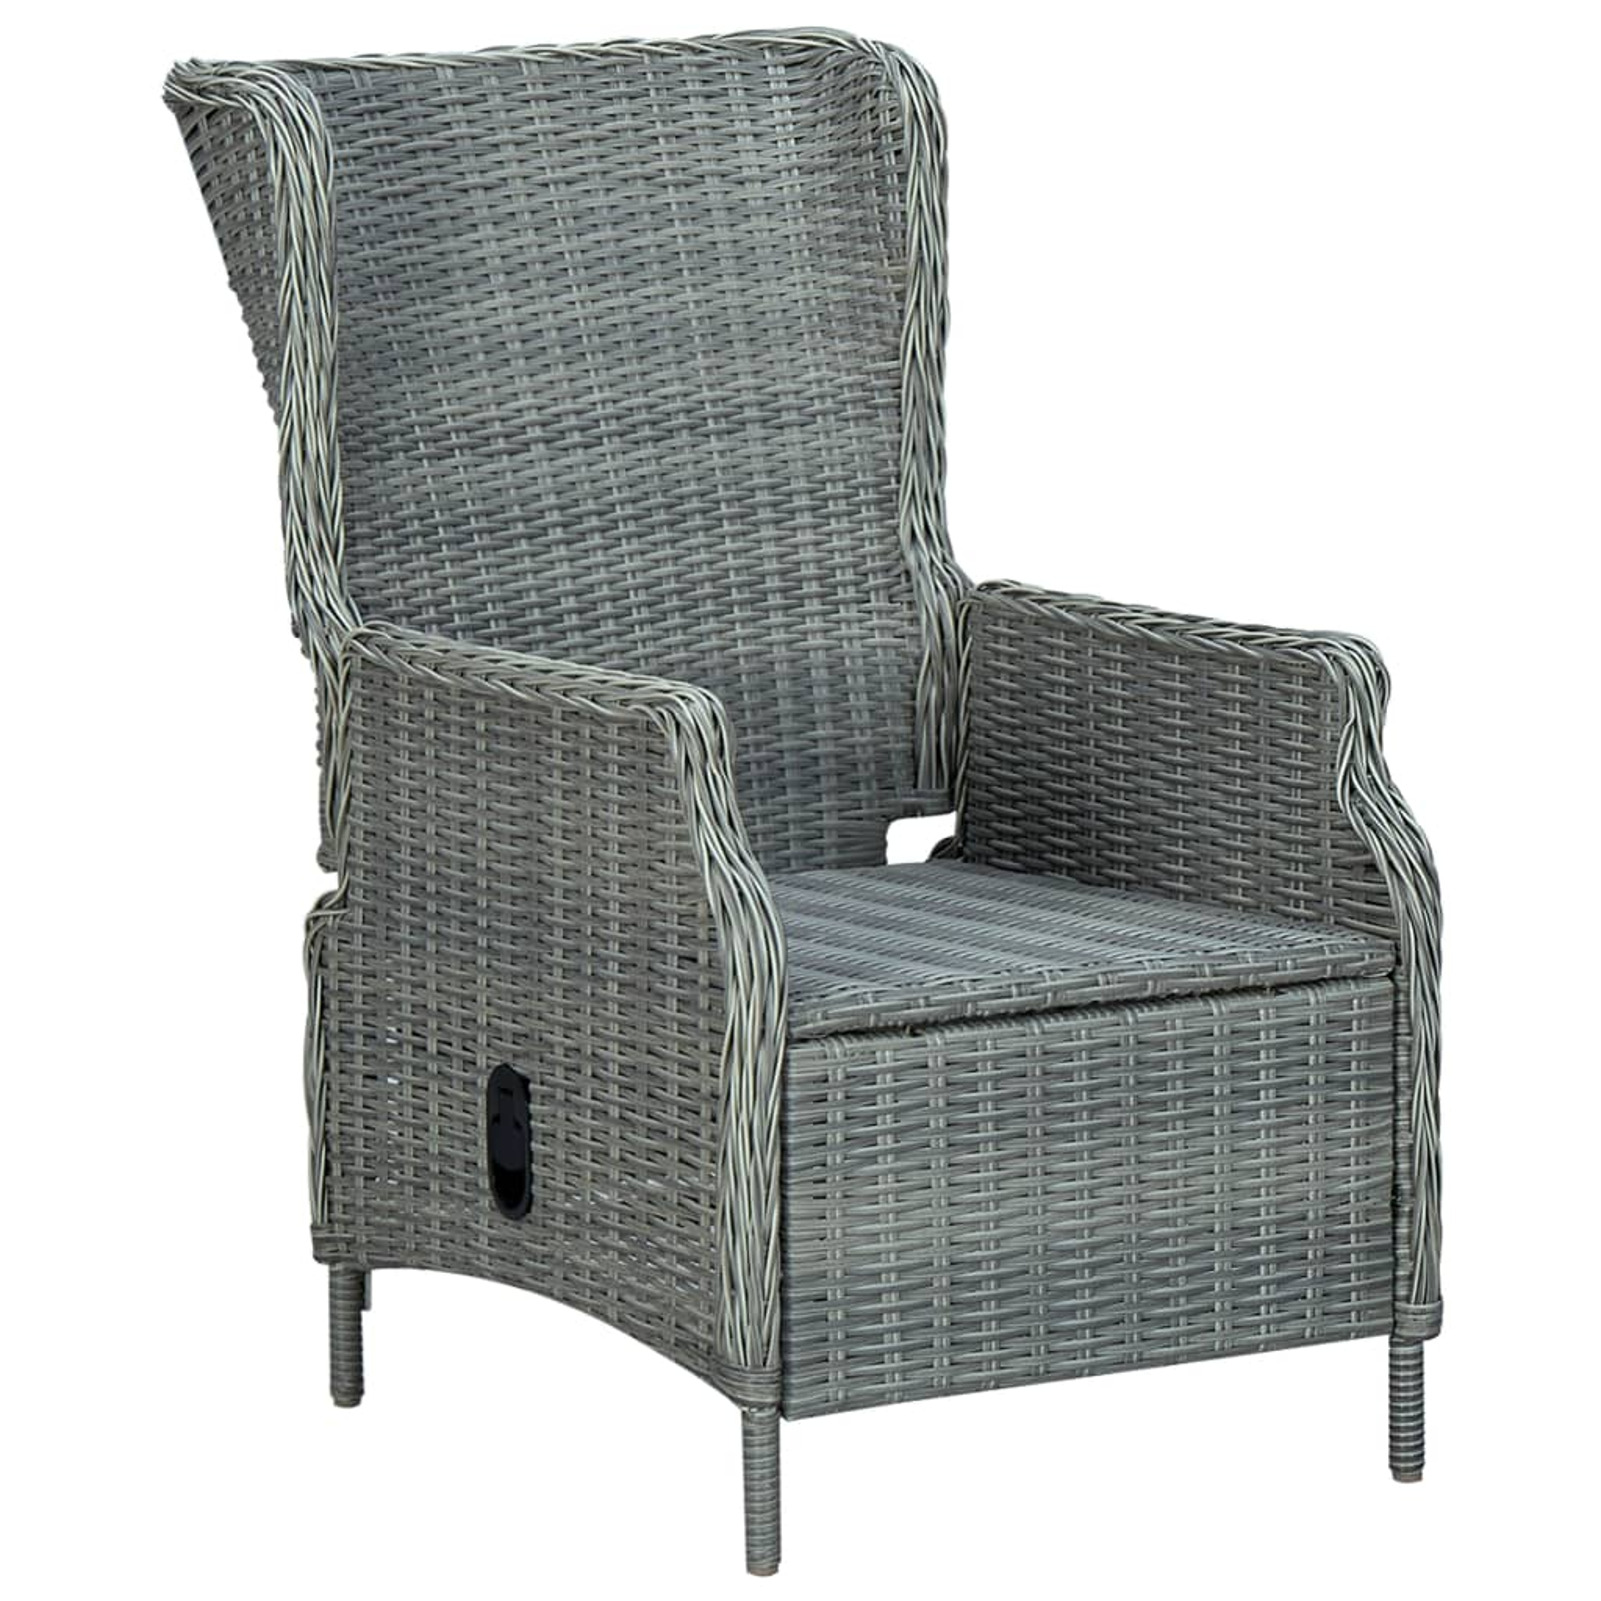 Suzicca Reclining Patio Chair with Cushions Poly Rattan Gray - image 3 of 7